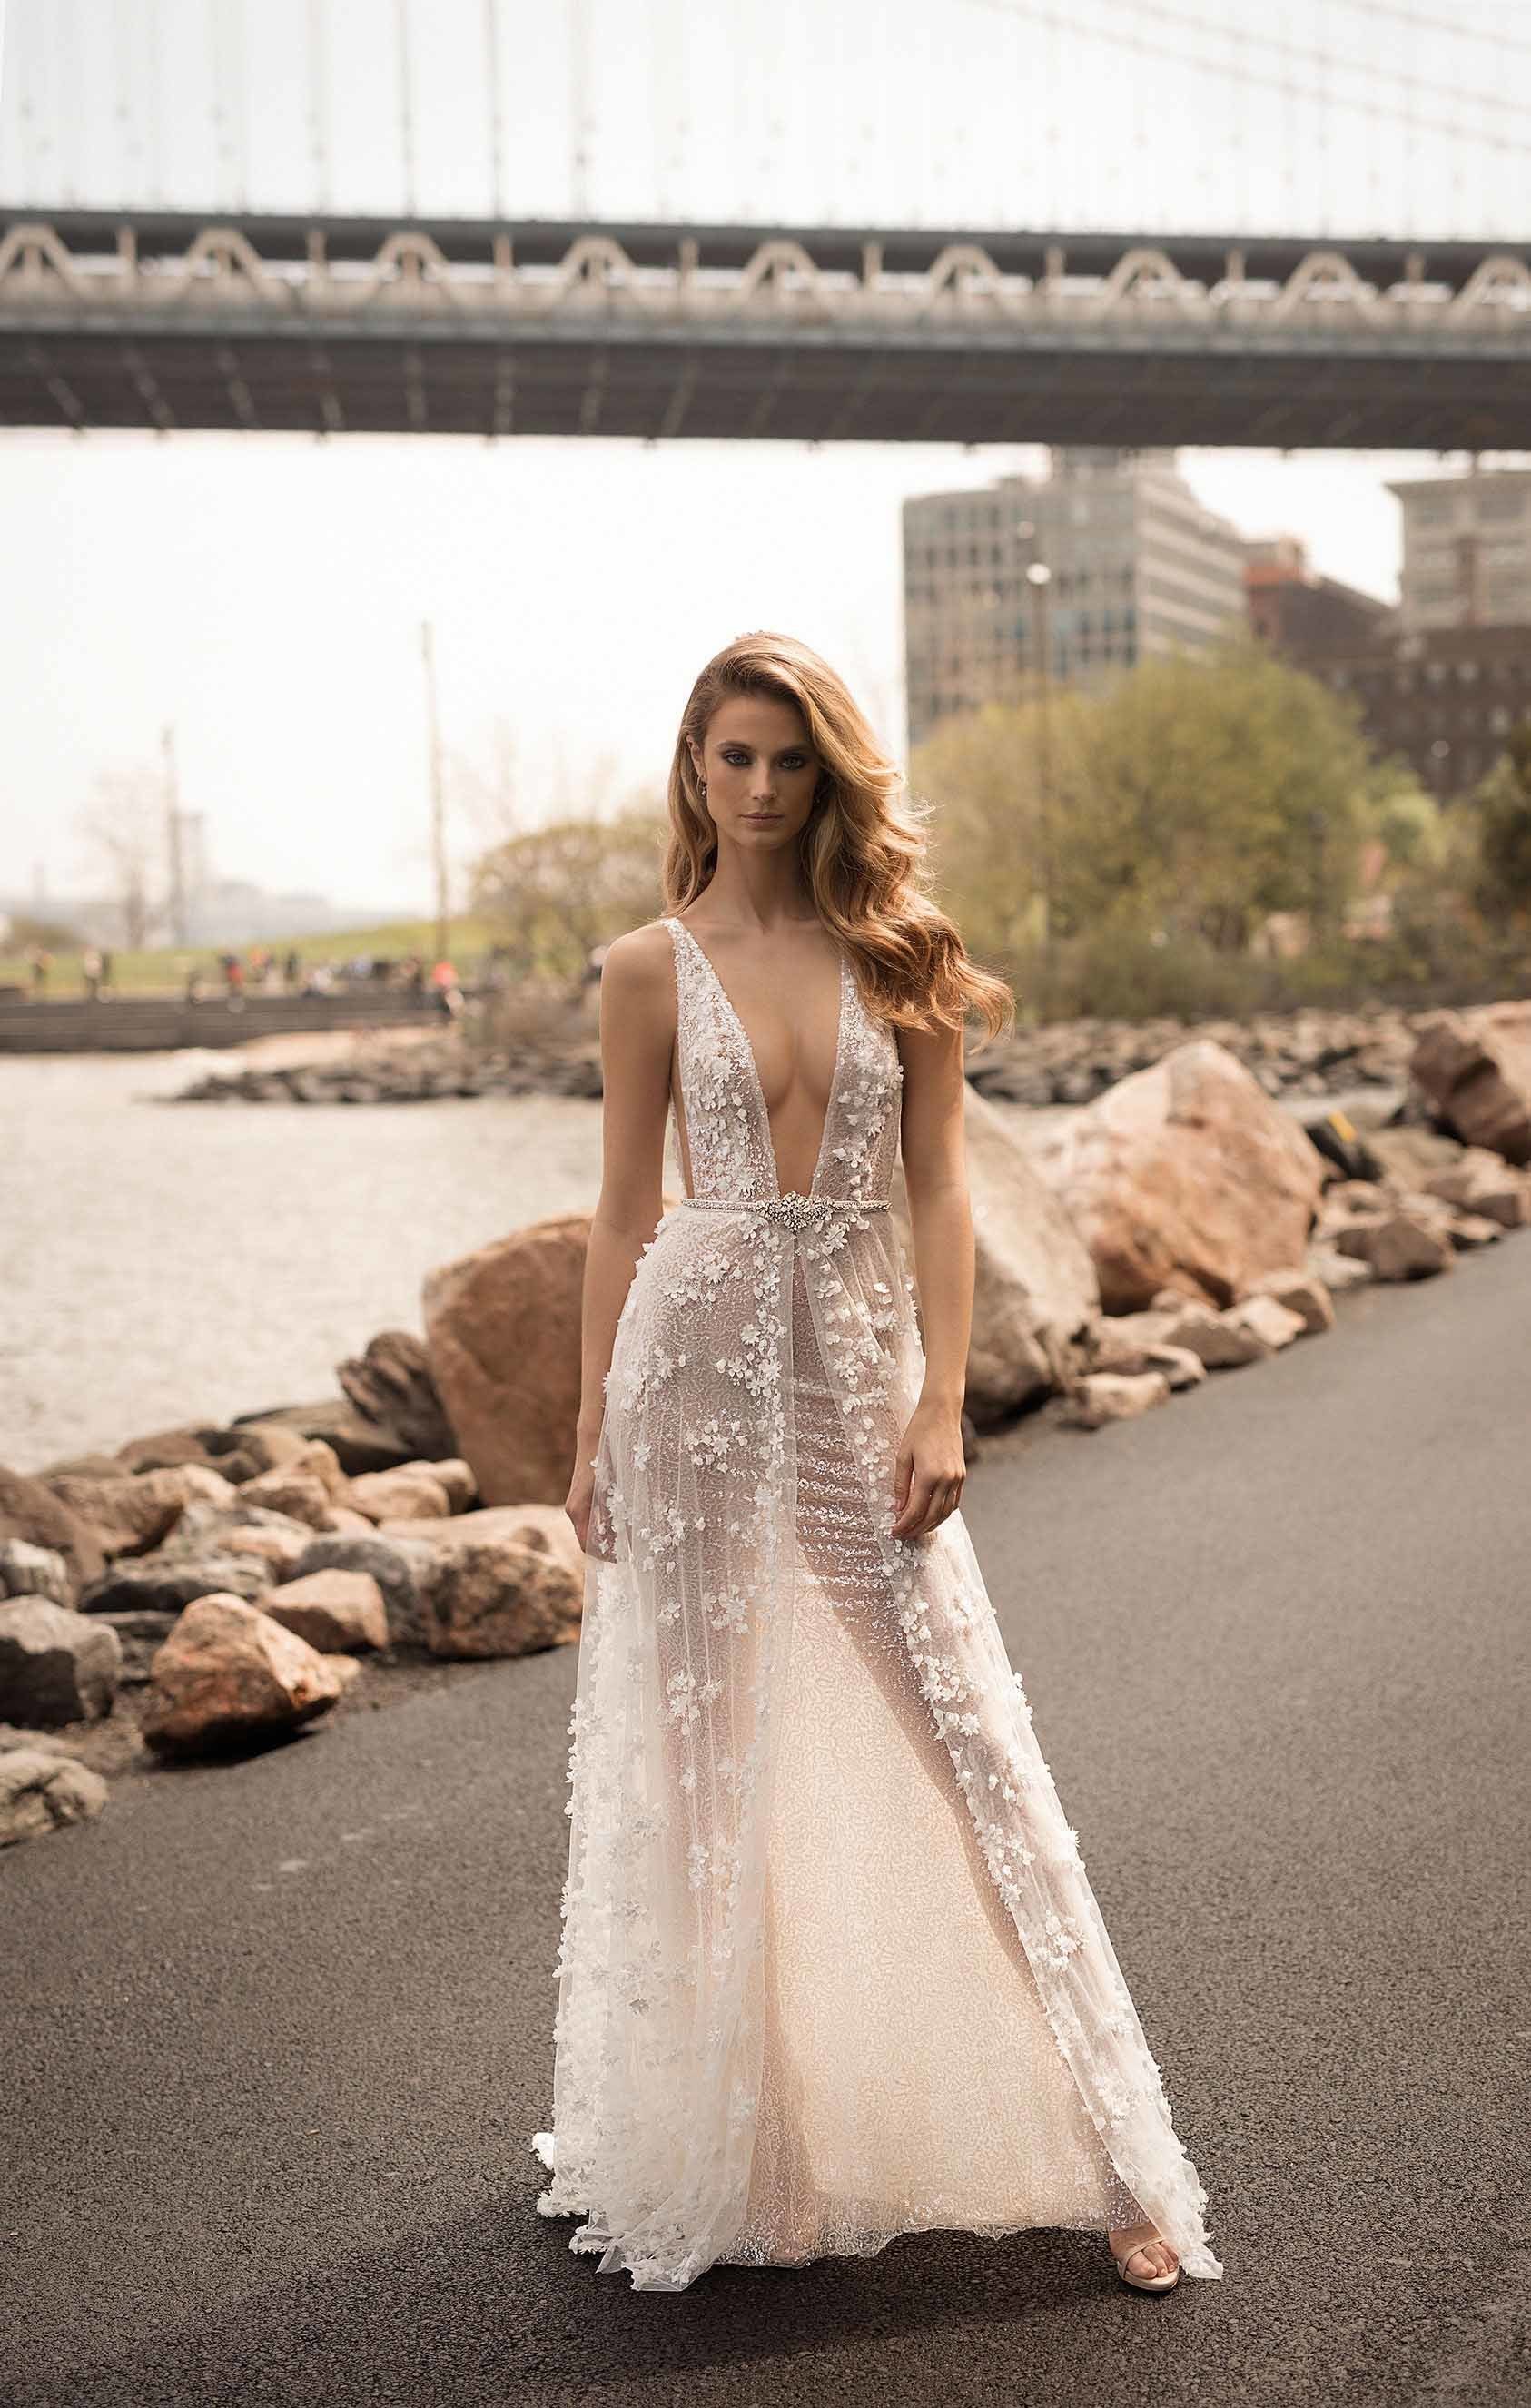 Lace-Bridal-Evening-Gowns Wedding-Dress